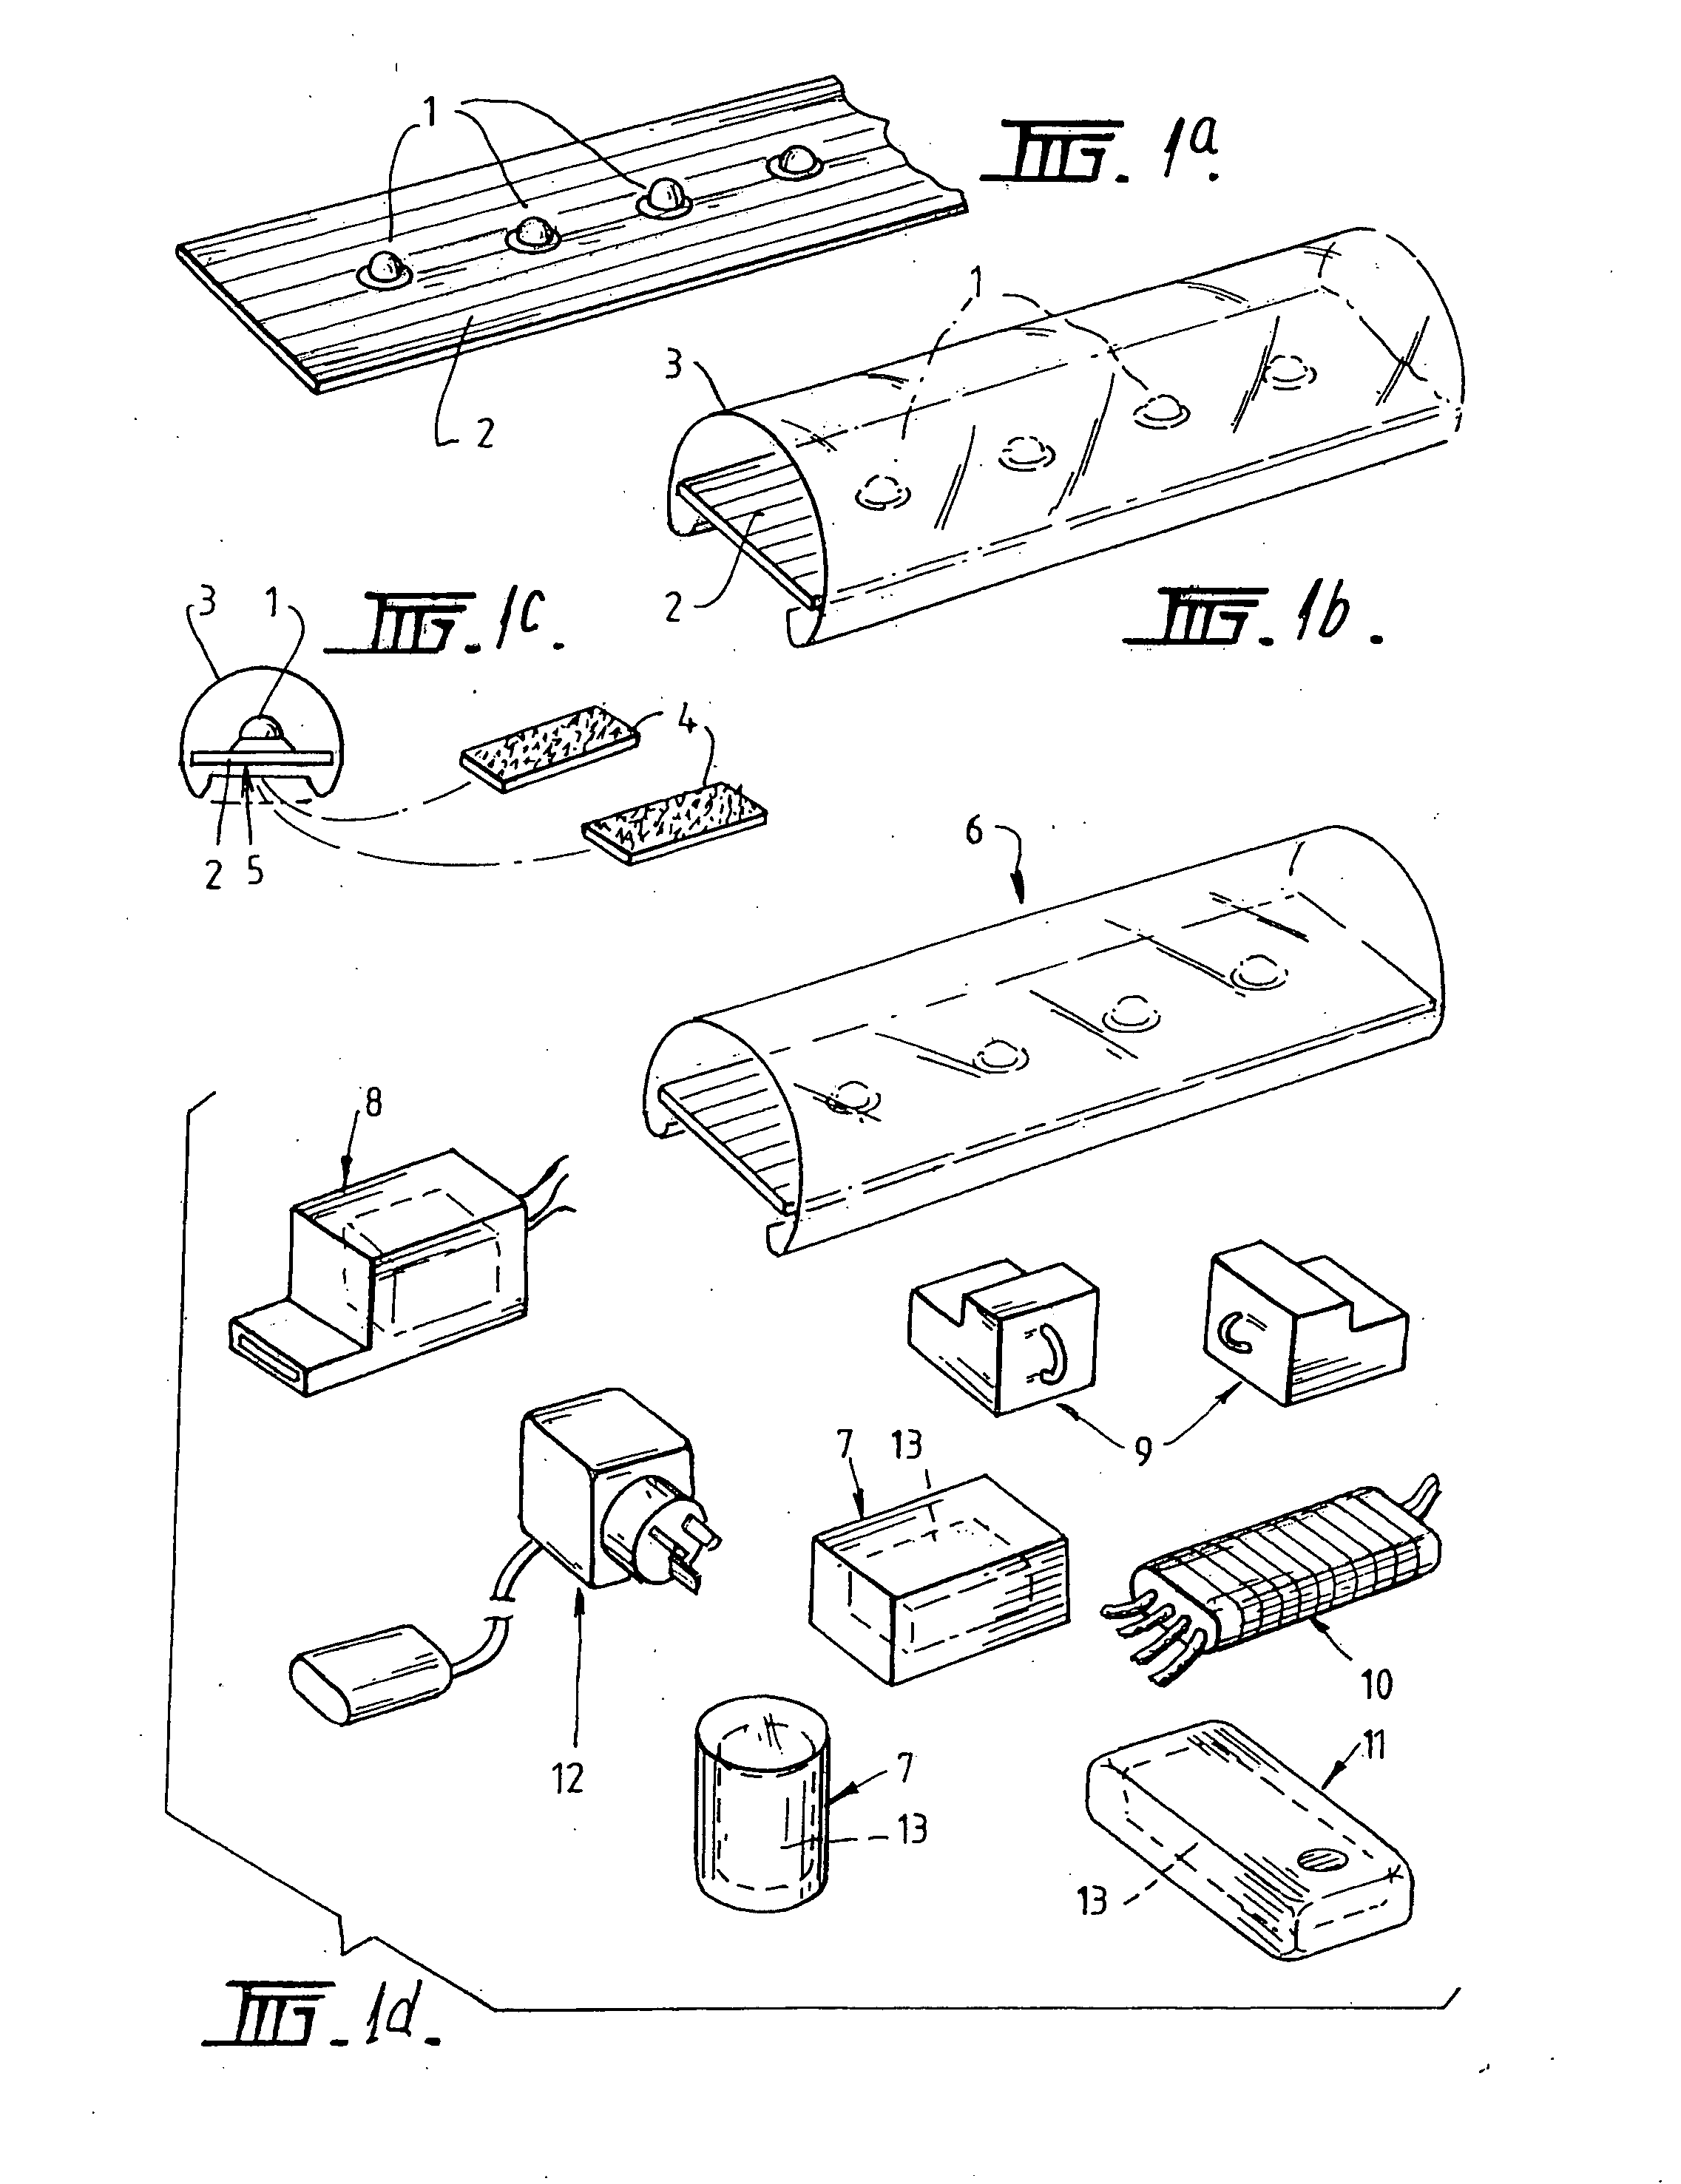 Methods and apparatus relating to improved visual recognition and safety